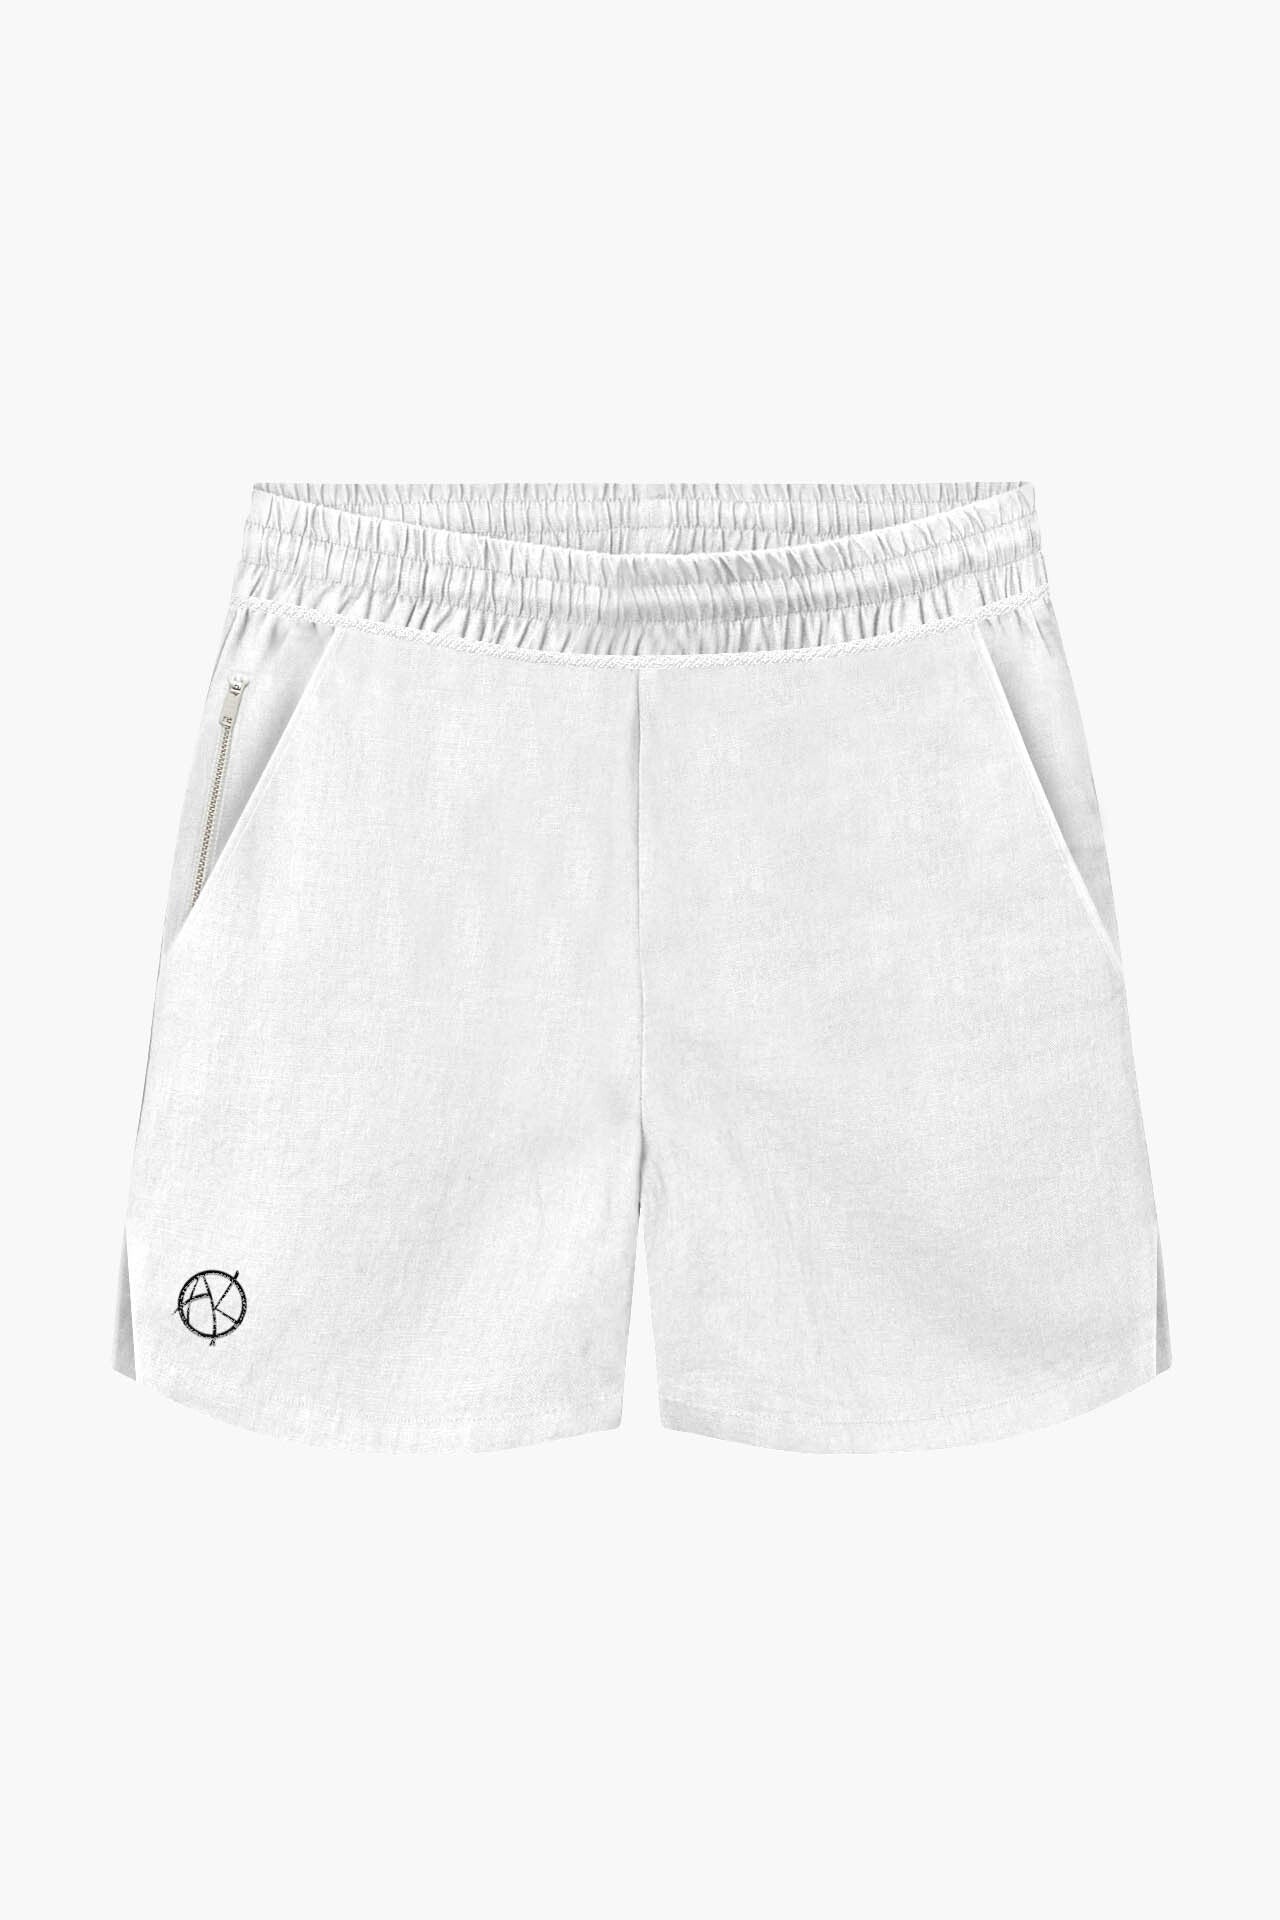 ANARCHY LINEN SHORTS